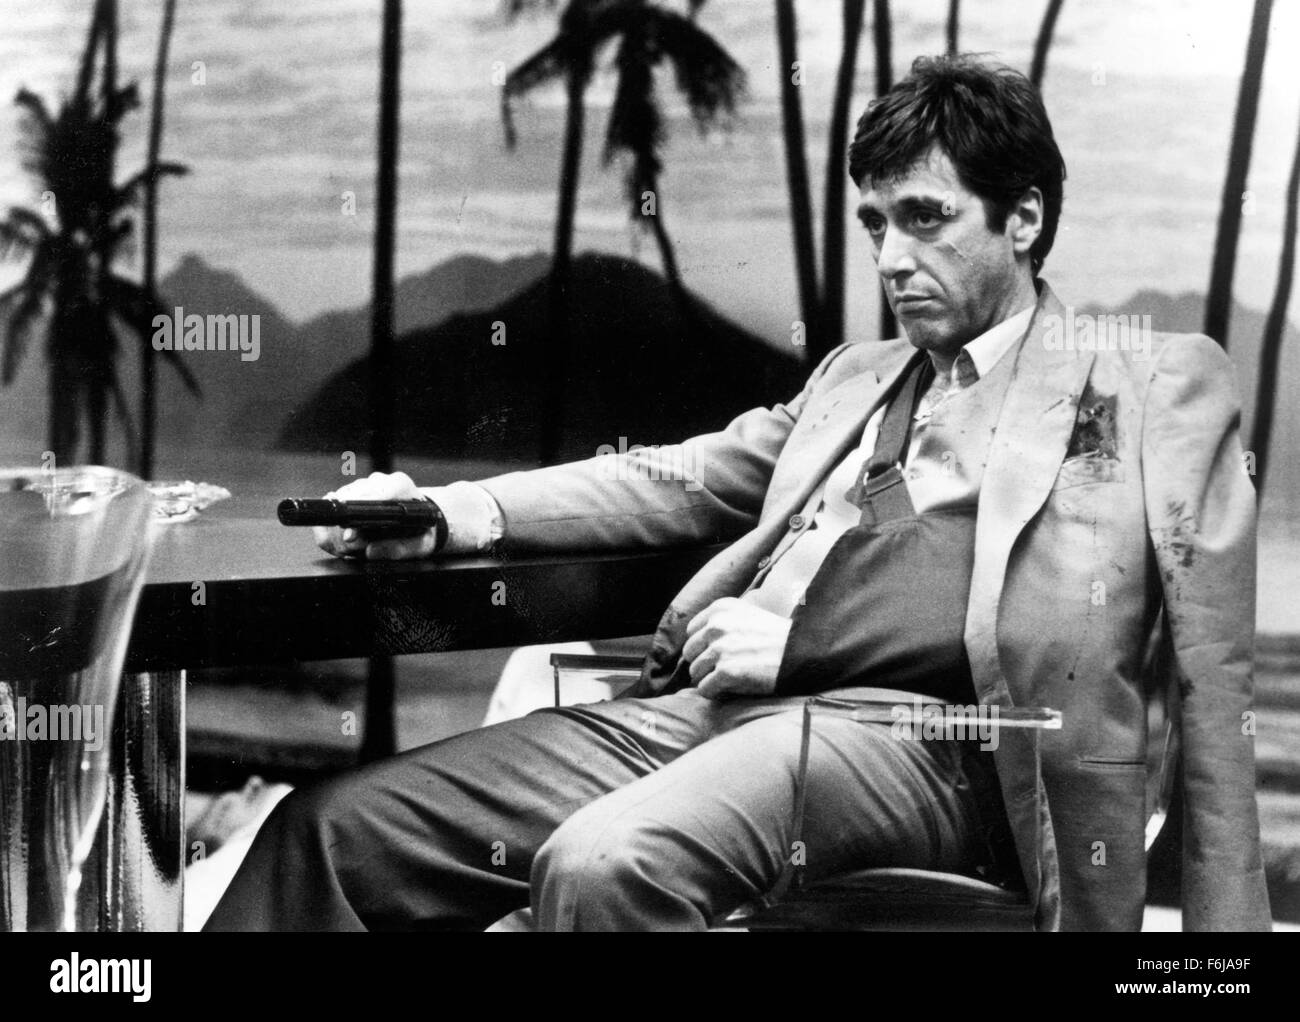 Al Pacino Tony Montana Scarface Black And White Stock Photos And Images